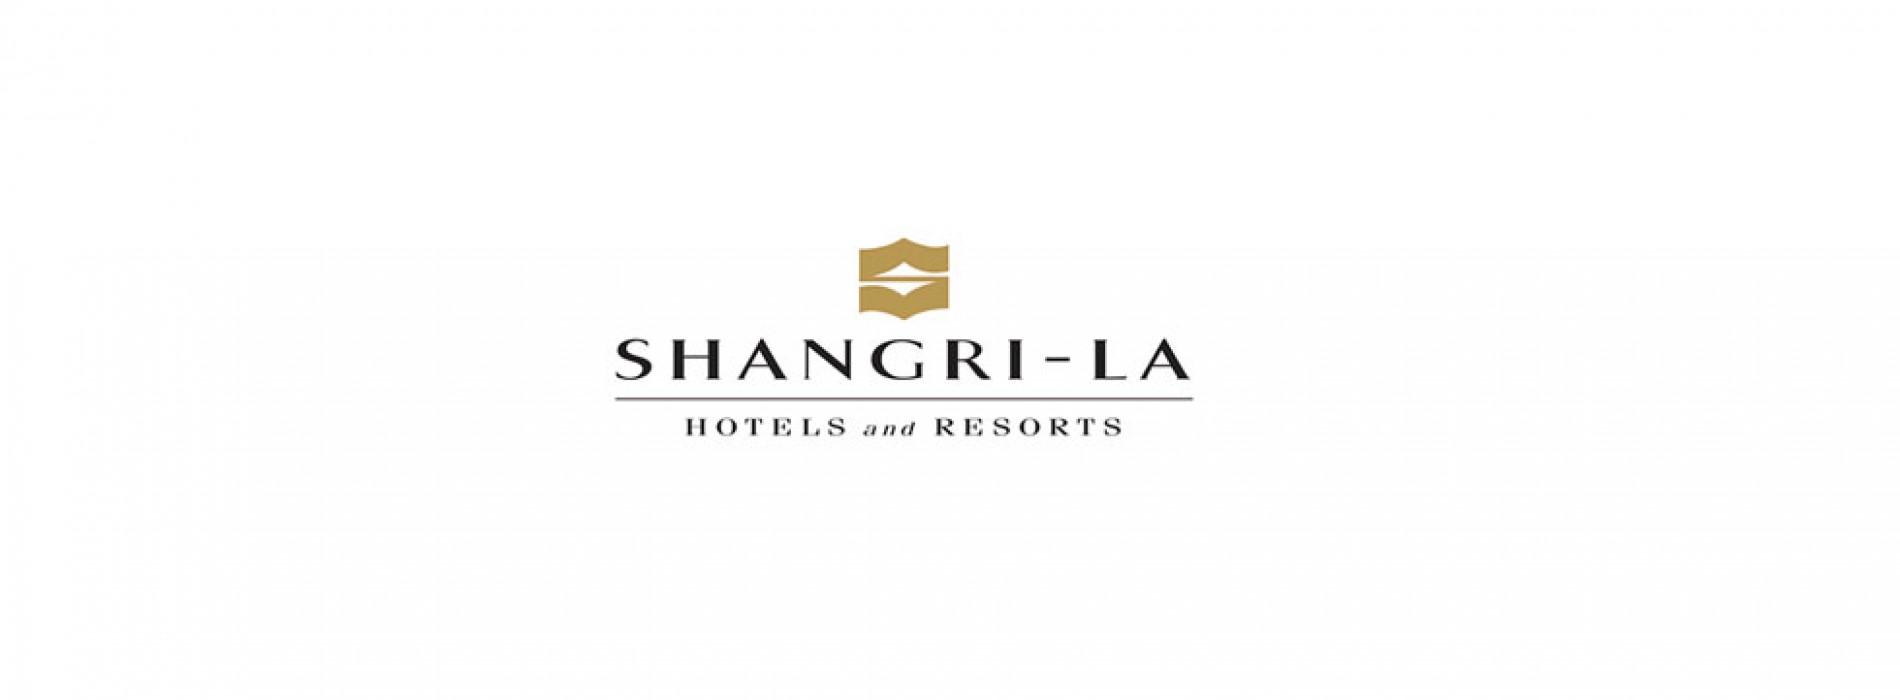 Shangri-La Hotels and Resorts announces Kerry Hotel, Hong Kong will open in December 2016